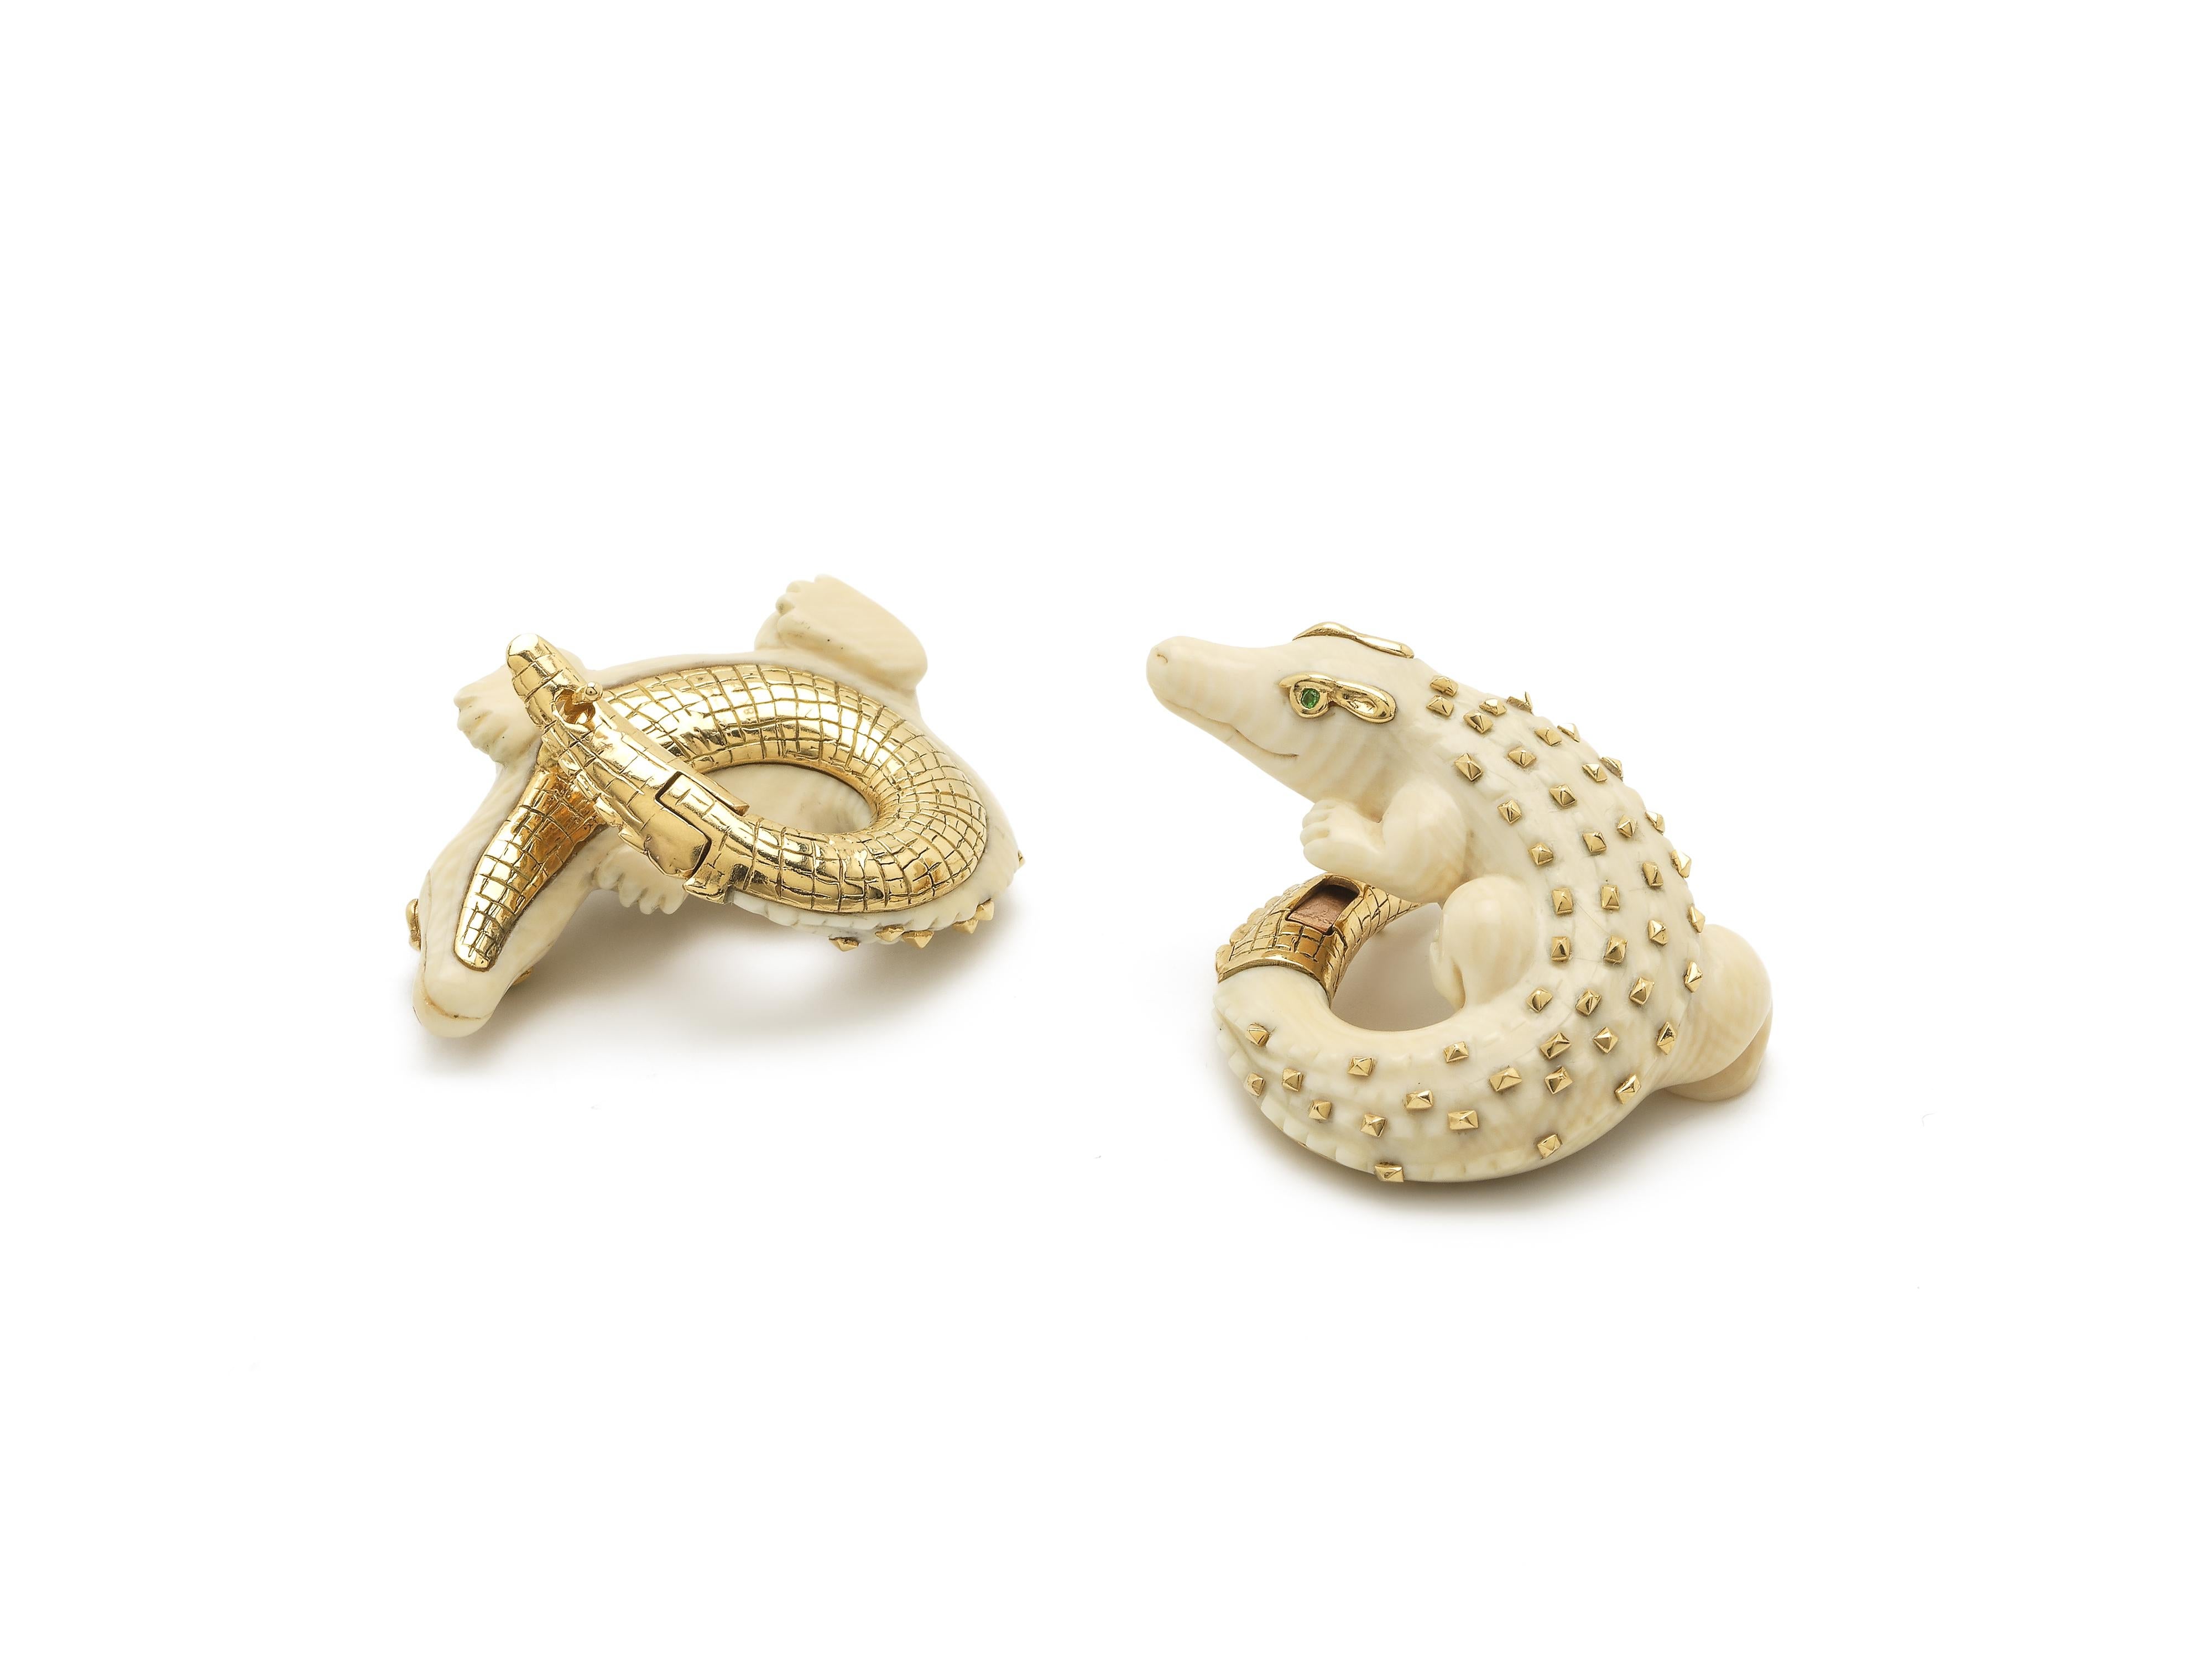 Two playful alligators, carved in 60,000-year-old mammoth tusk, are crafted to coil around the lobe in these bold earring designs. Fashioned with 18k yellow gold embellishments on their bodies and green tsavorite eyes, the earrings’ closing